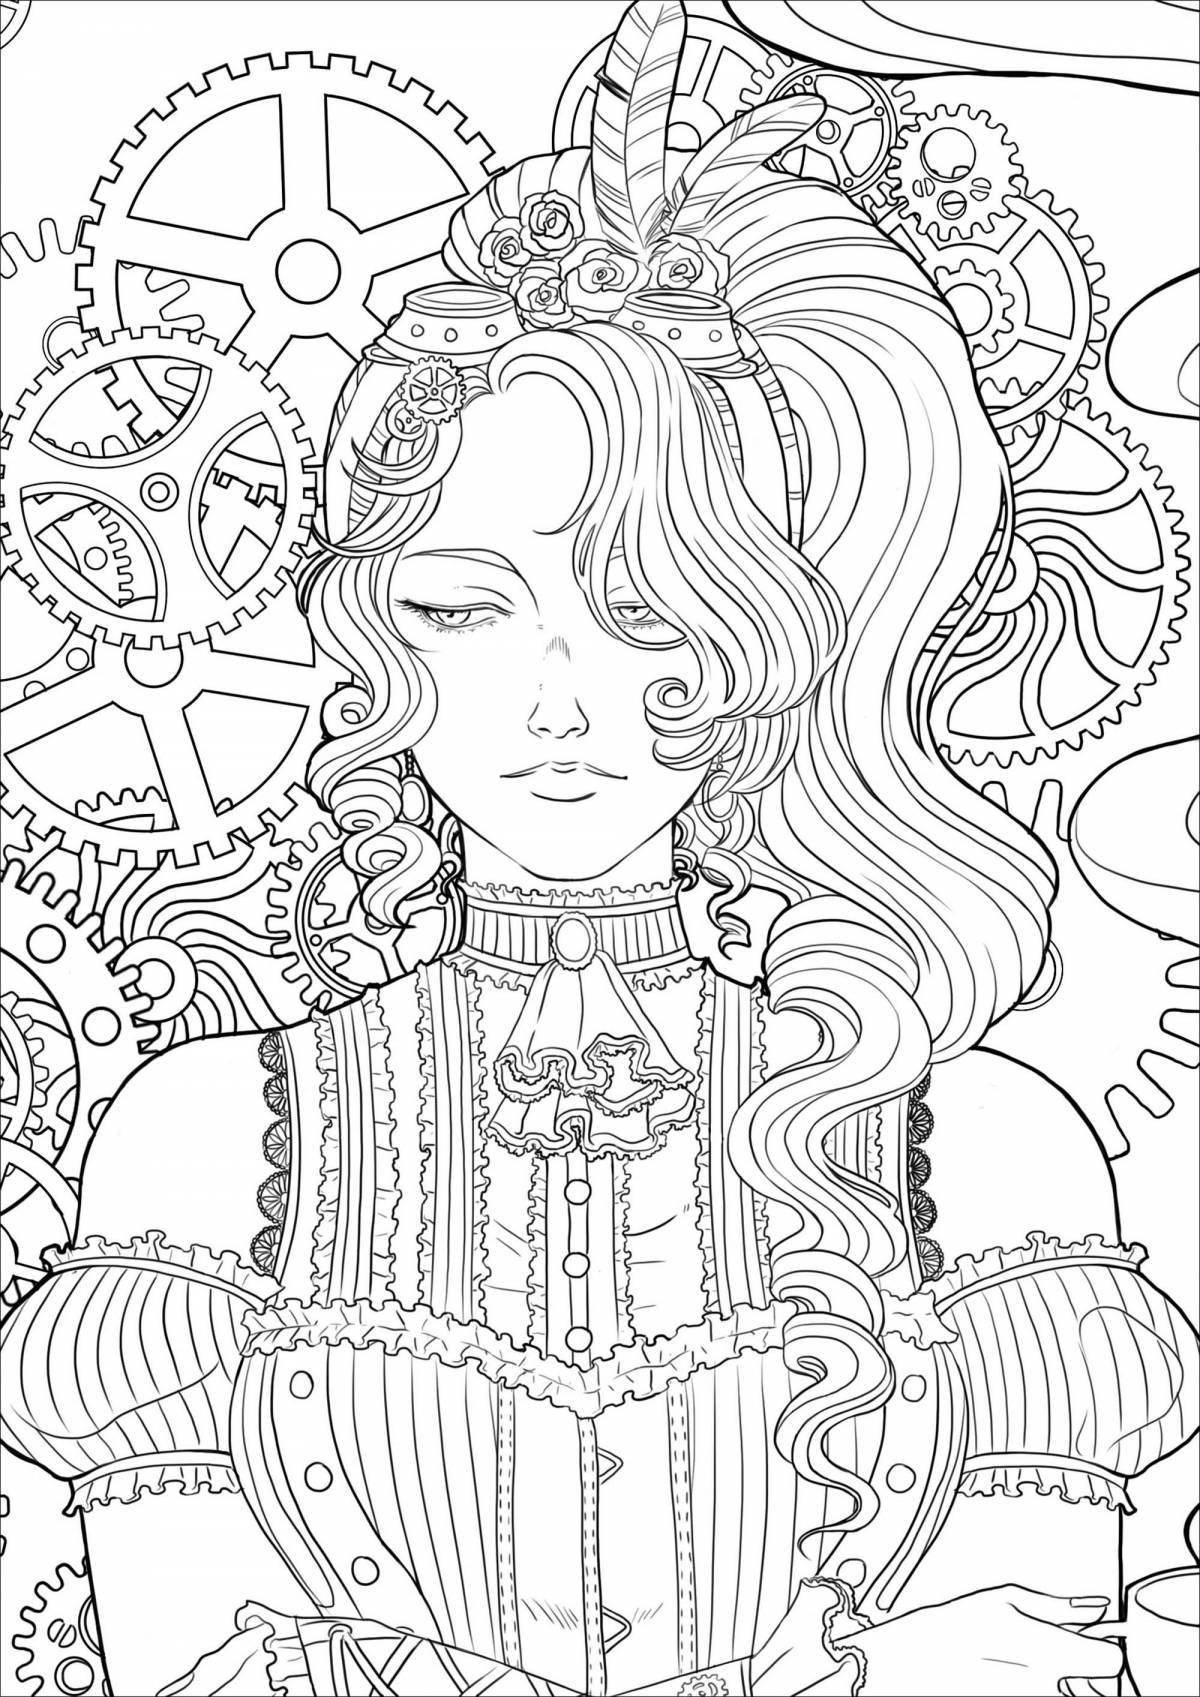 Fairy tale coloring for girls complex